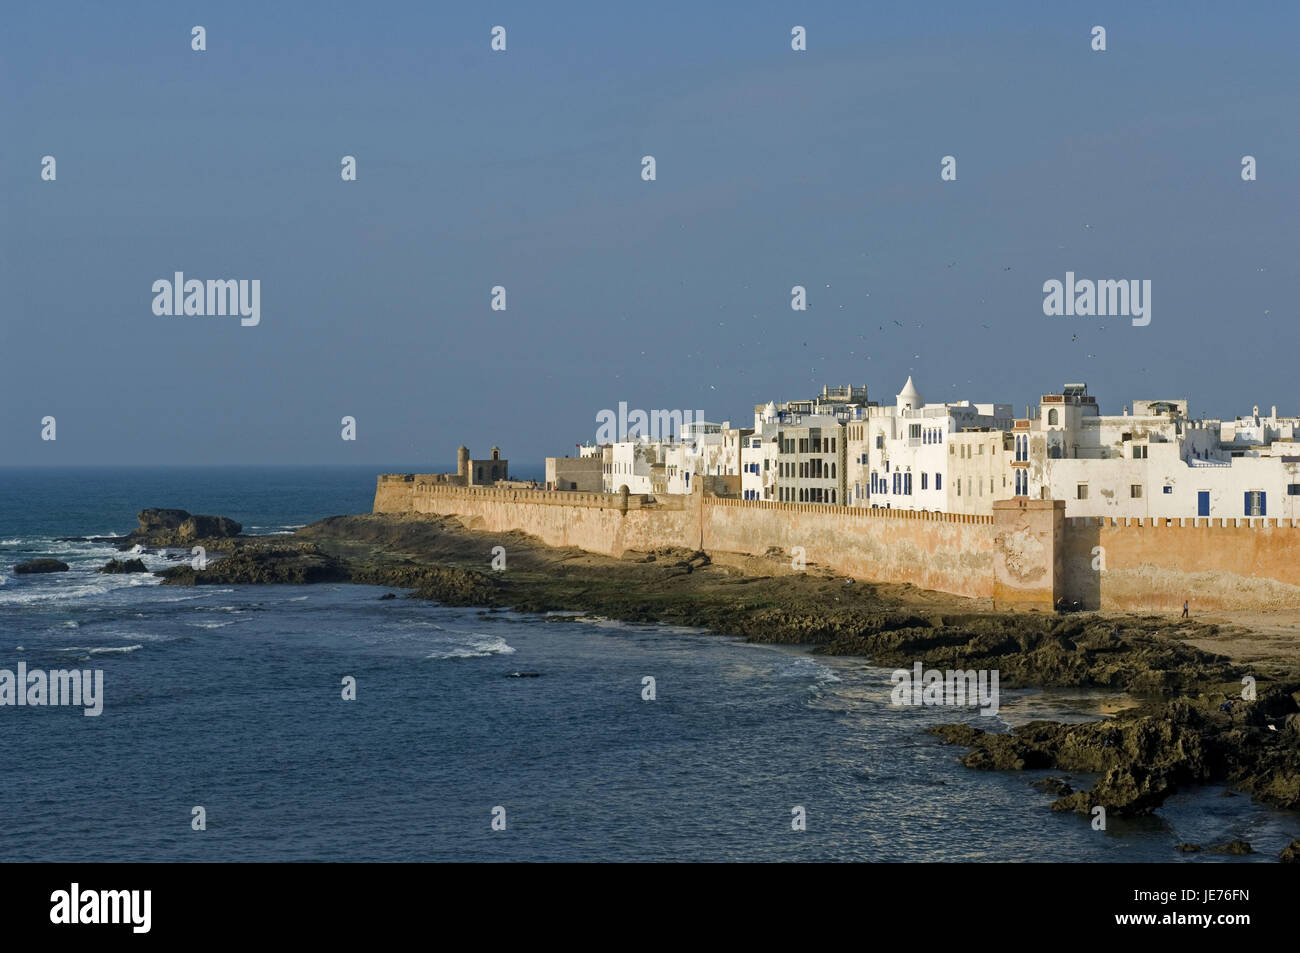 Morocco, Essaouira, town view, Medina, Africa, town, port, fishing town, tourism, destination, place of interest, city wall, defensive wall, houses, residential houses, architecture, Old Town, historically, UNESCO-world cultural heritage, sea, sky, copy space, Stock Photo